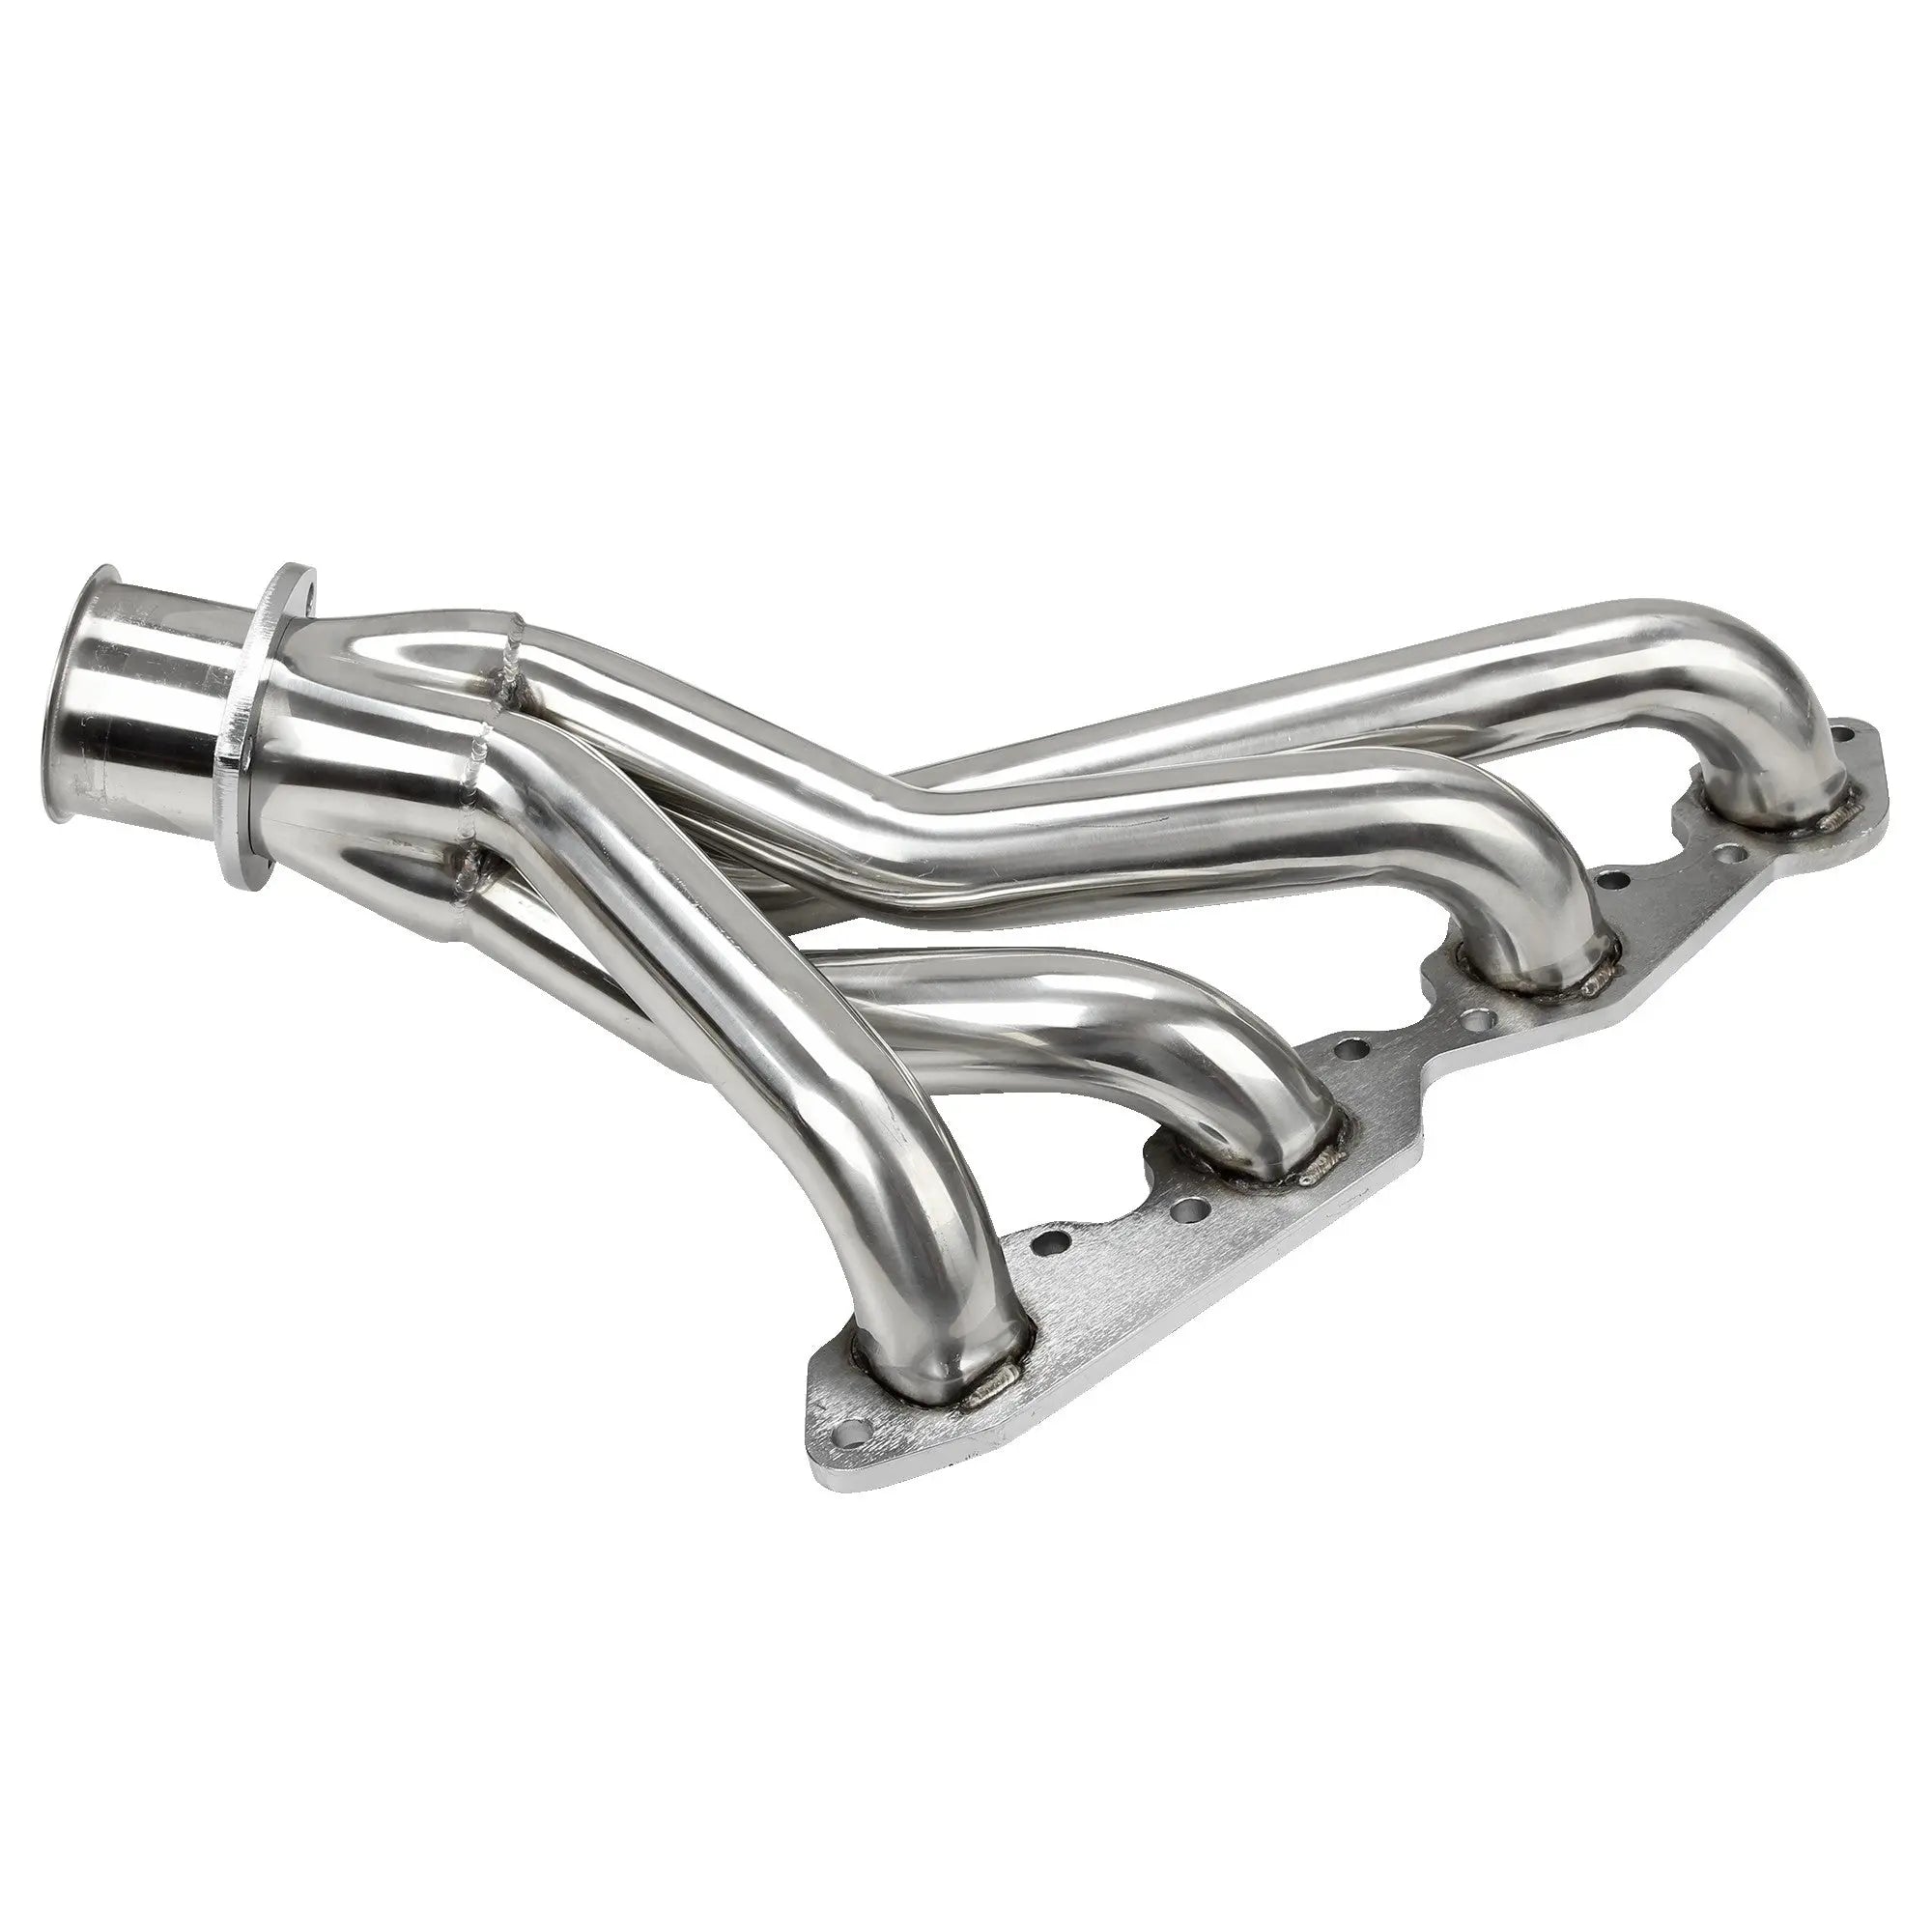 Exhaust Header for 1965-1972 Chevrolet Chevy 396 402 427 454 Short Tube Clearance